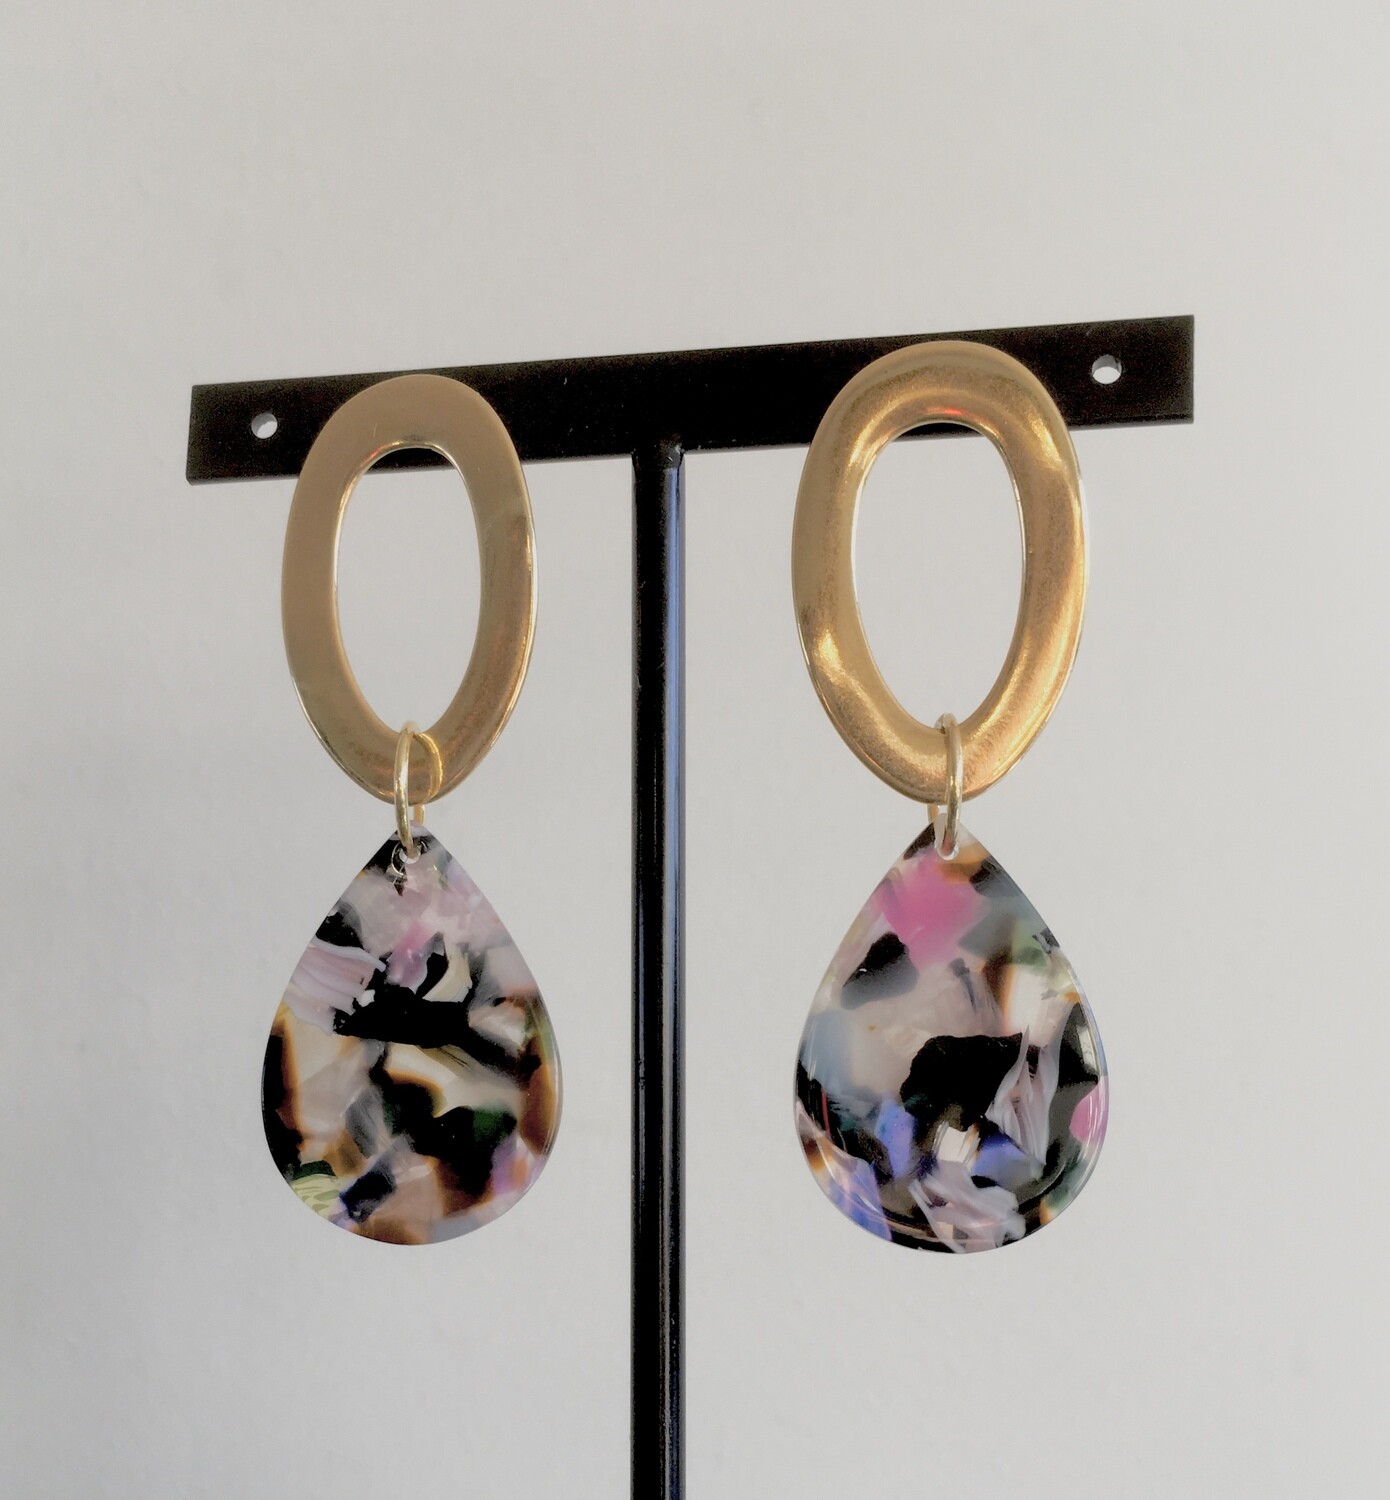 Gold hoops and lavender marble earrings